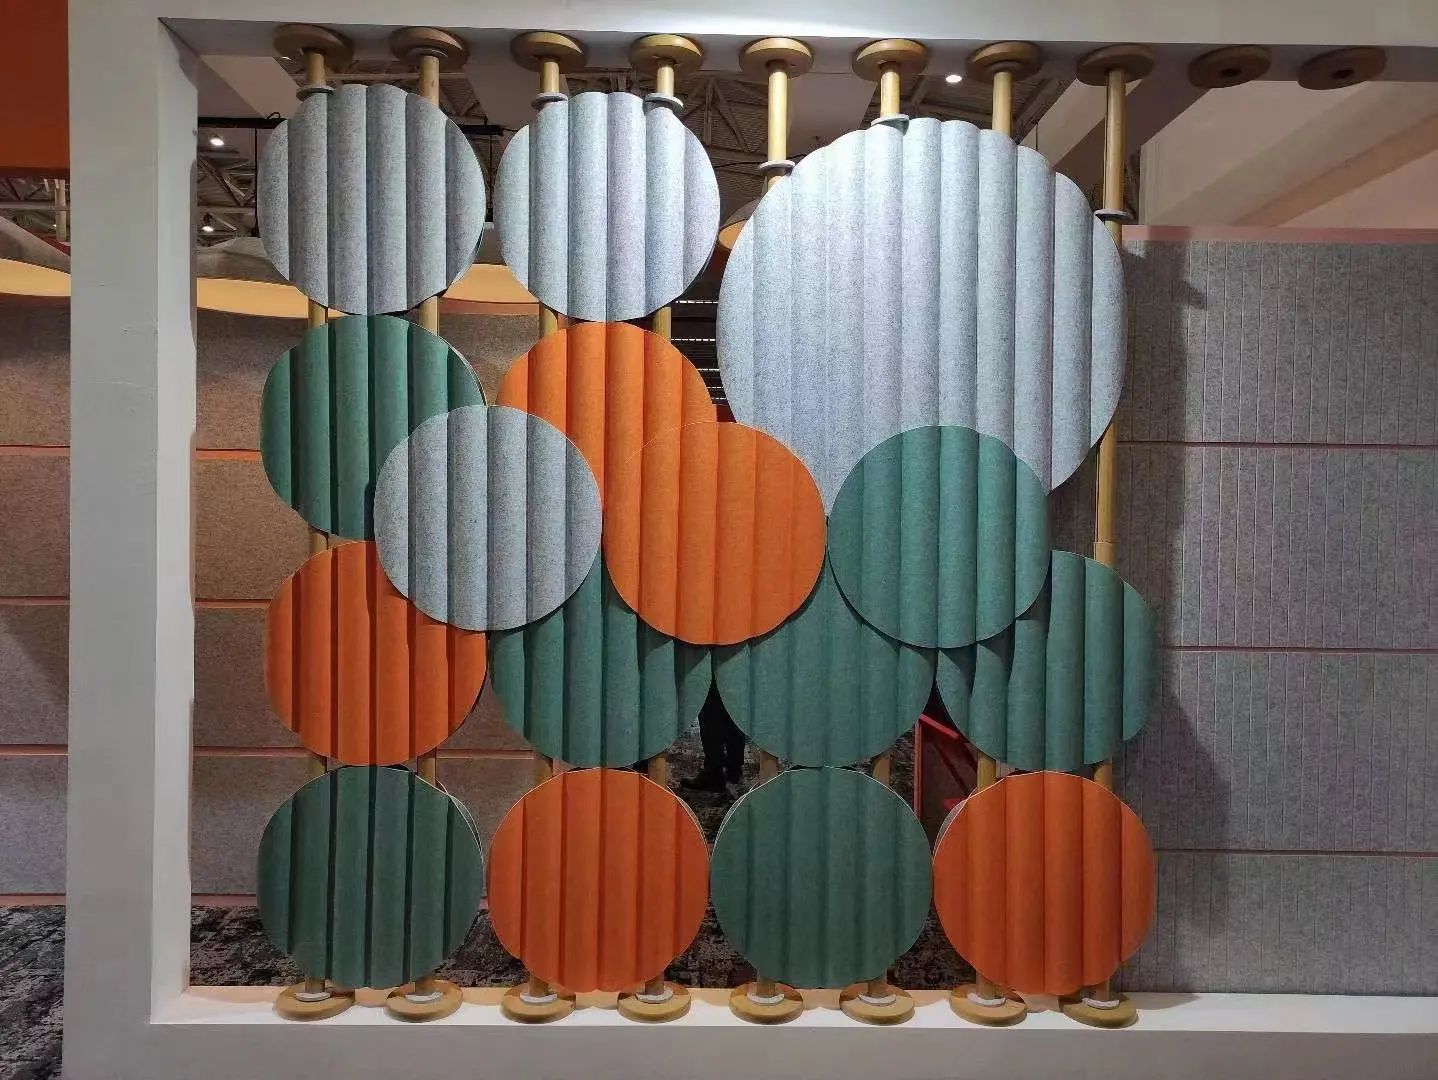 How to choose polyester fiber sound-absorbing panels?